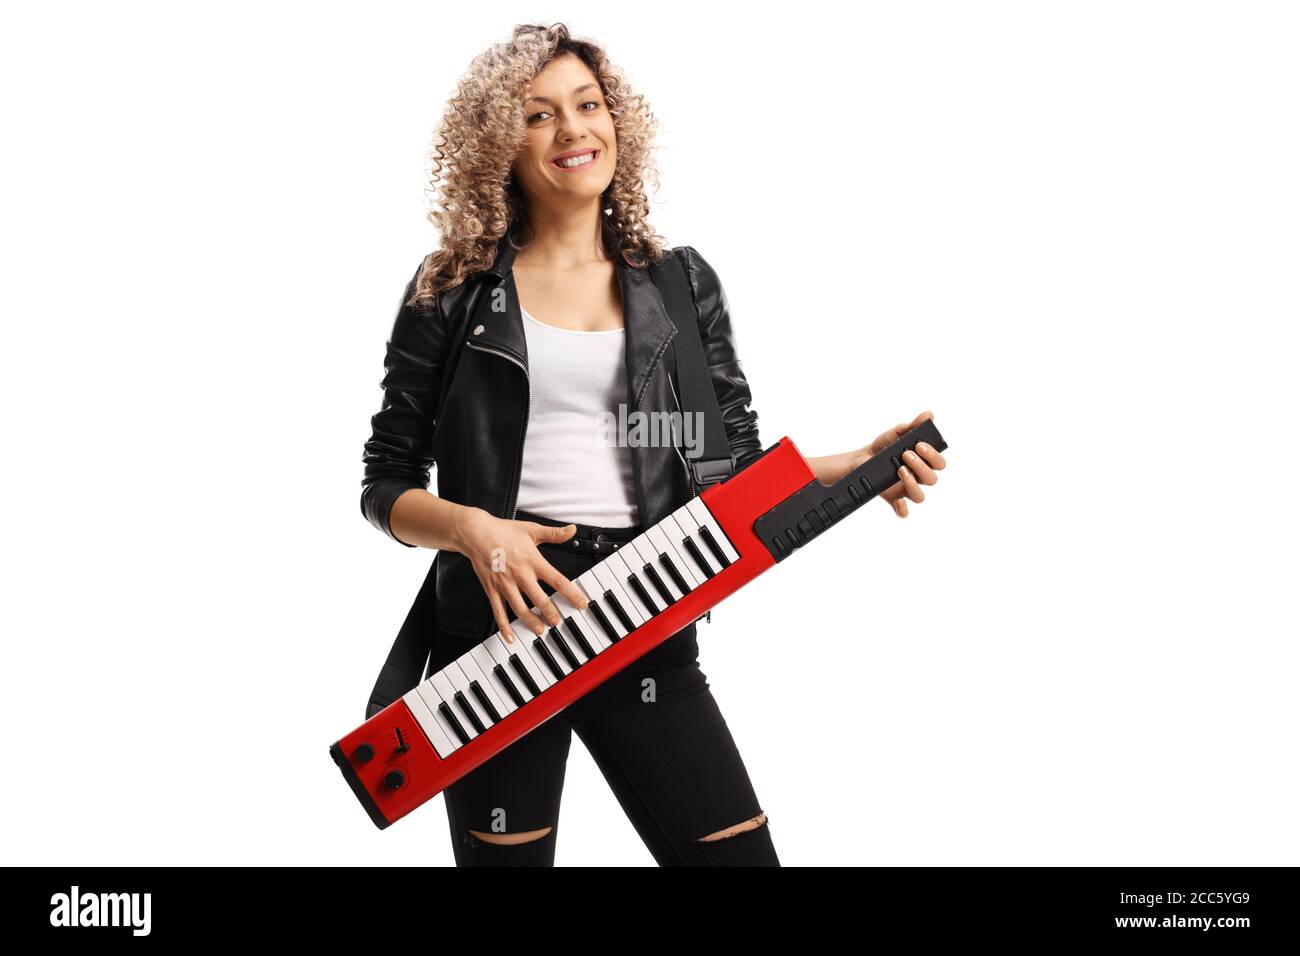 Female musician with a curly blond hair playing a keytar synthesizer isolated on white background Stock Photo